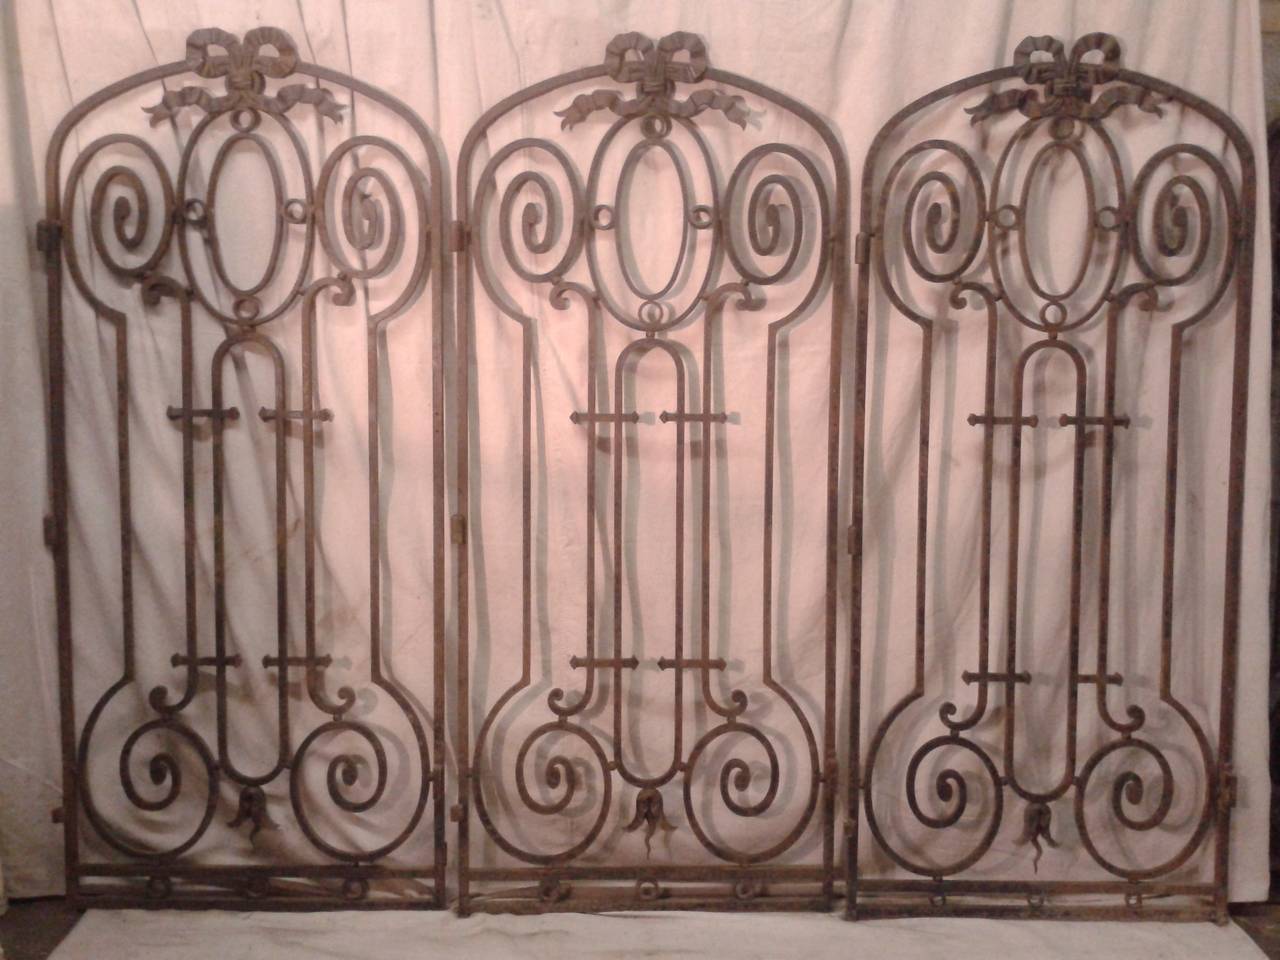 A full set of three pairs of 19th century French iron gates, Louis XVI style. A beautiful set one of a kind outside doors.